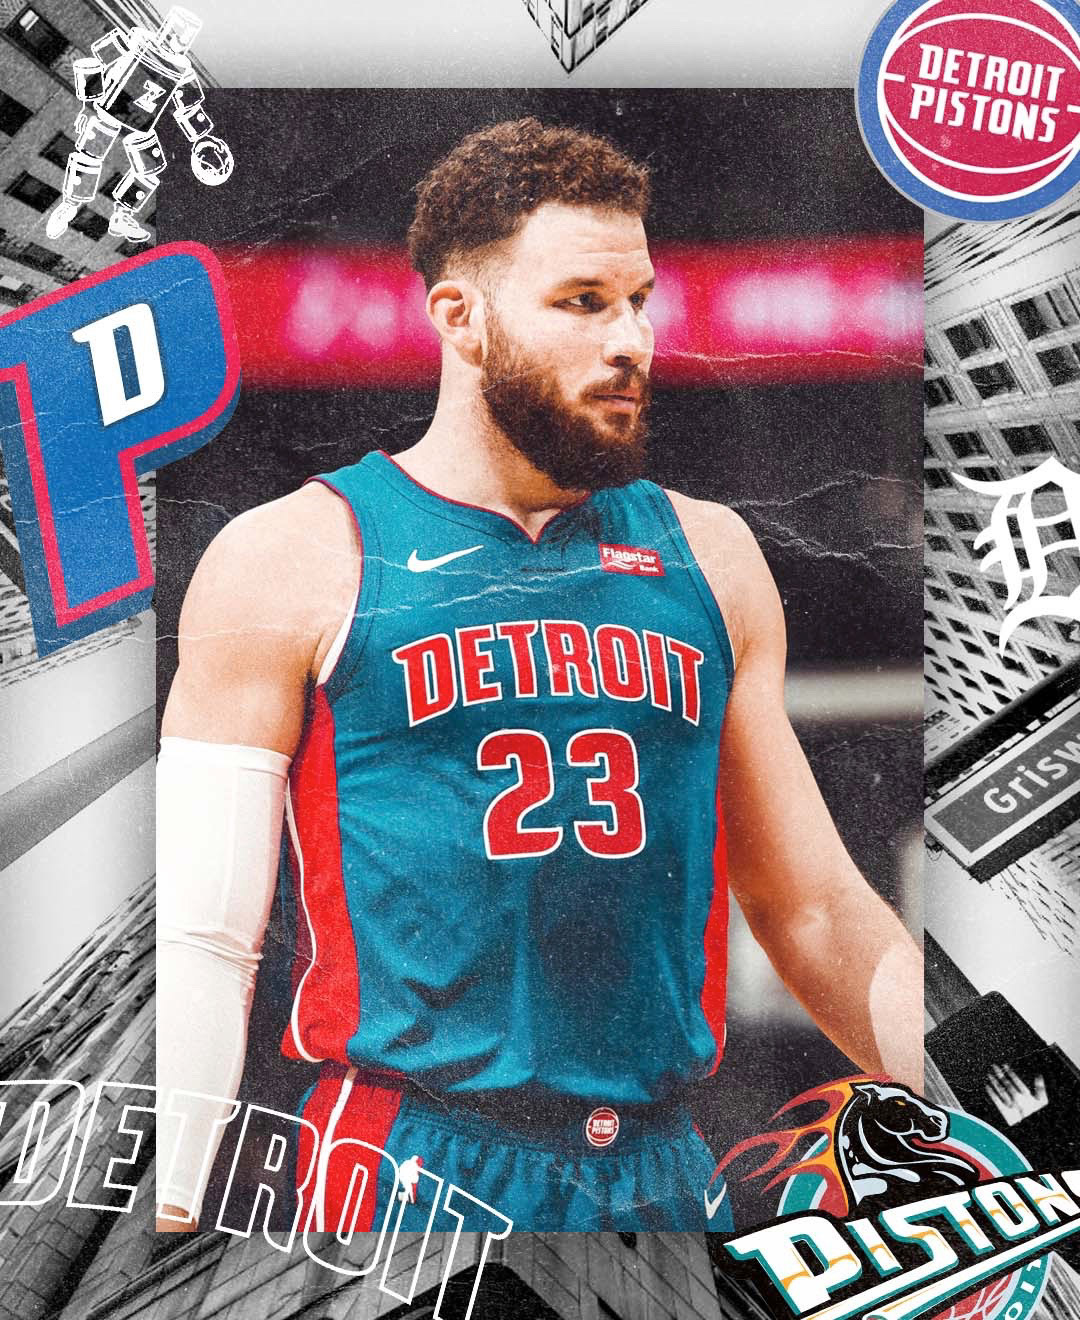 blake griffin pistons teal jersey